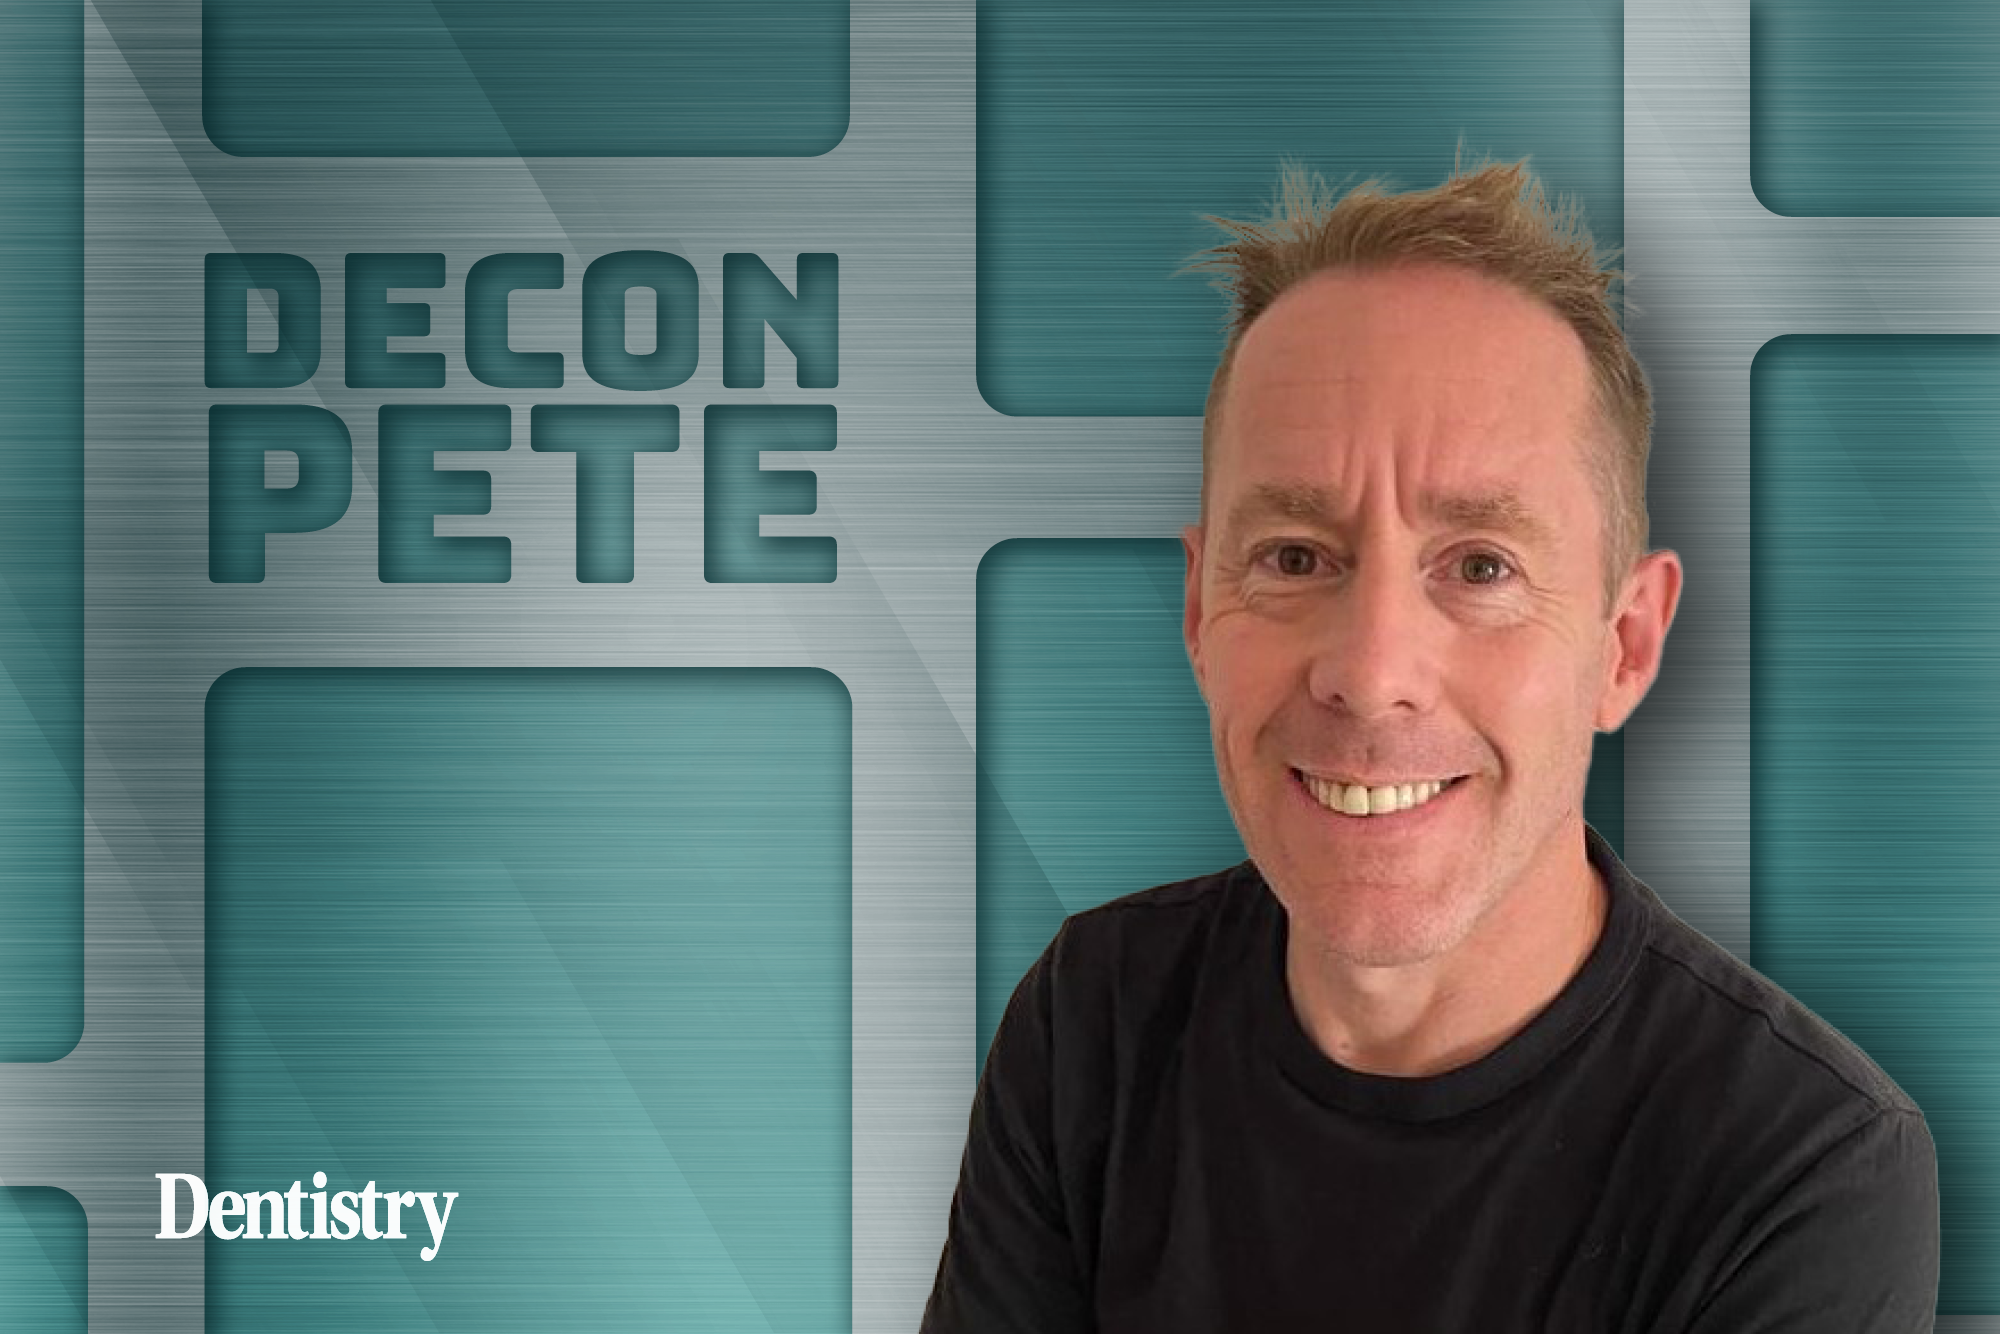 In the fourth part of his sustainable dental waste management series, Decon Pete discusses additional easy ways you can reduce your practice's waste.